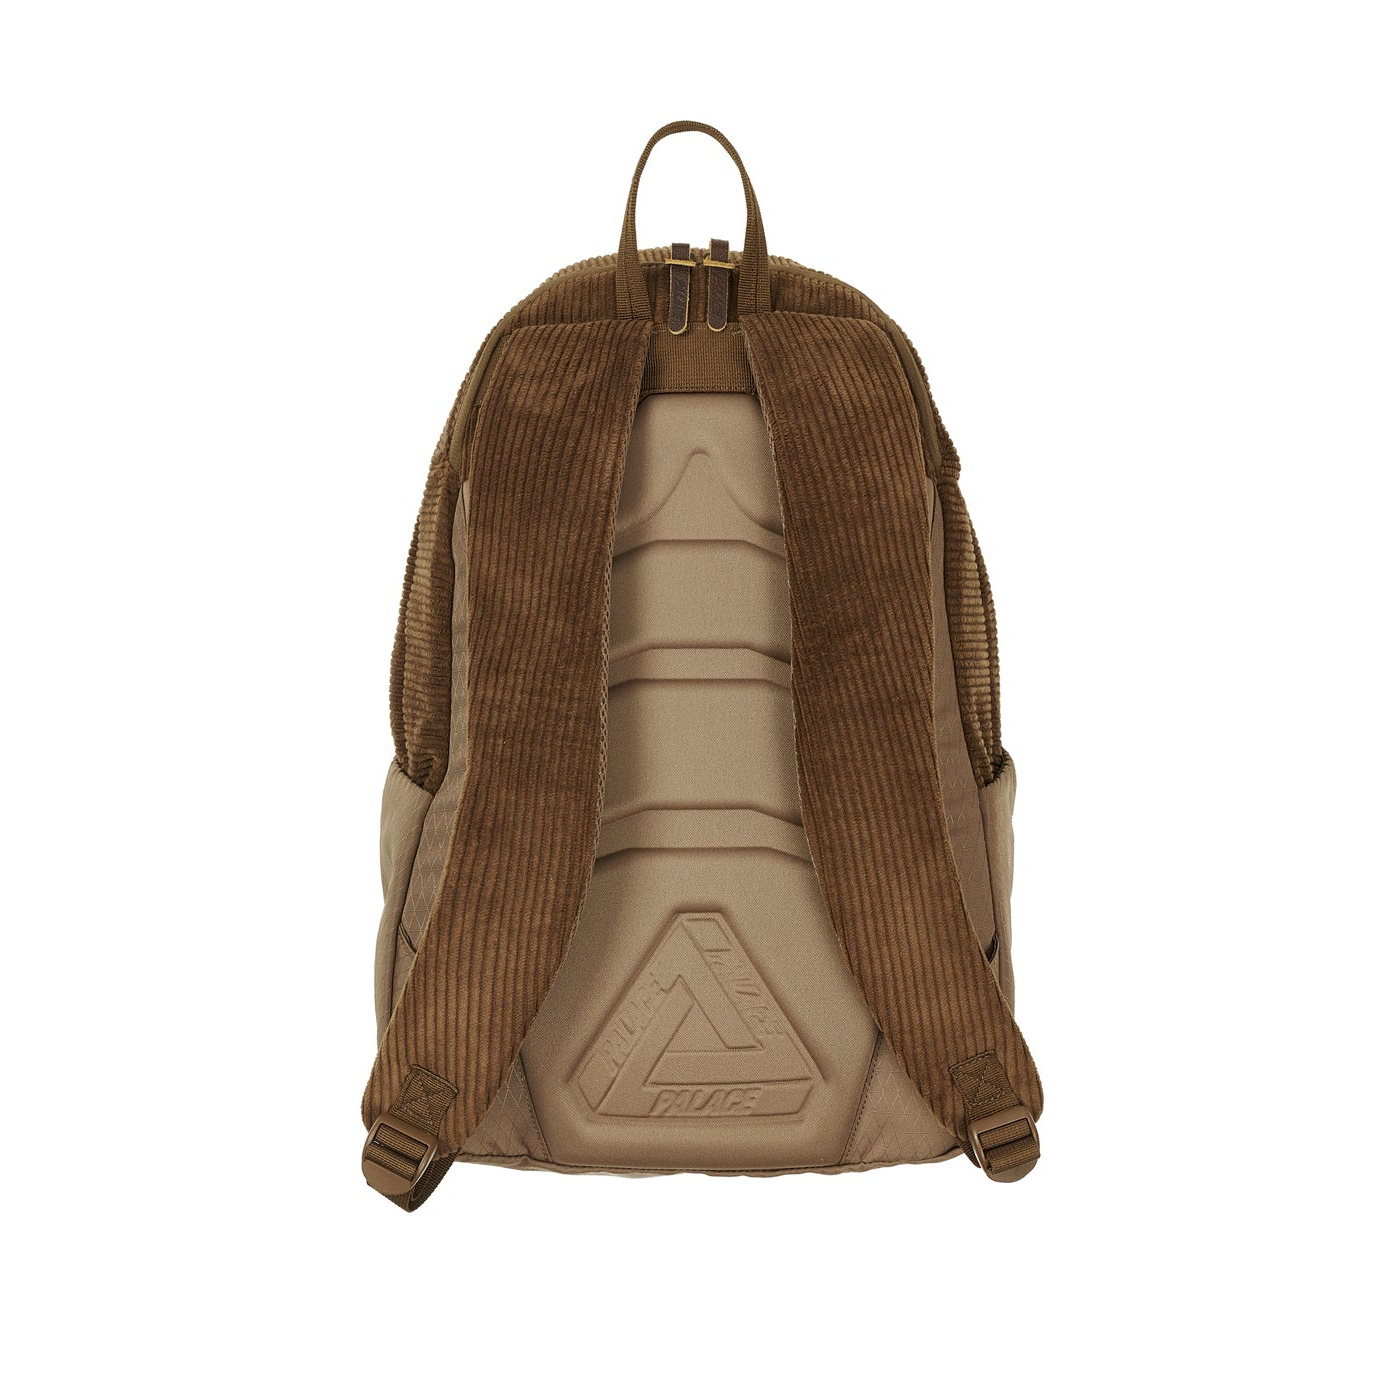 Thumbnail CORDUROY BACKPACK BROWN one color